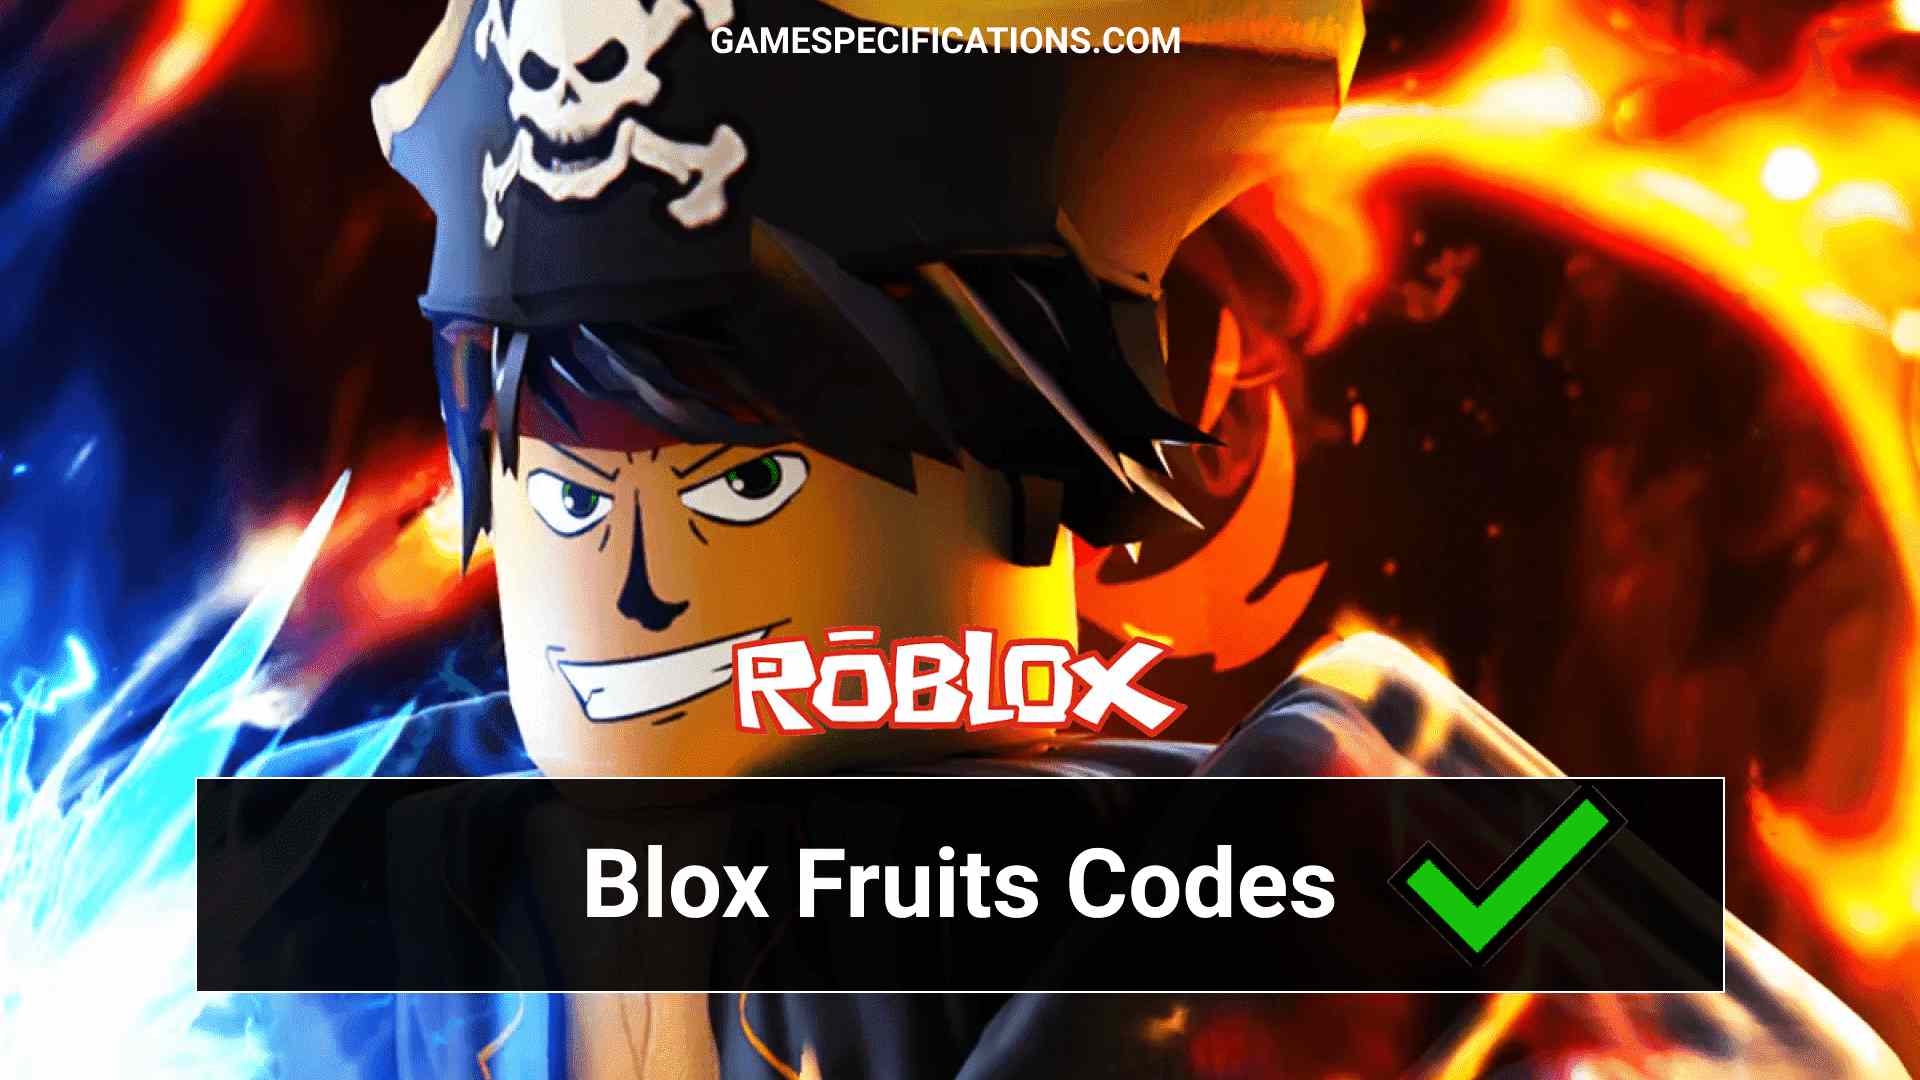 12 Working Roblox Blox Fruits Codes July 2021 Game Specifications - roblox kills wifi